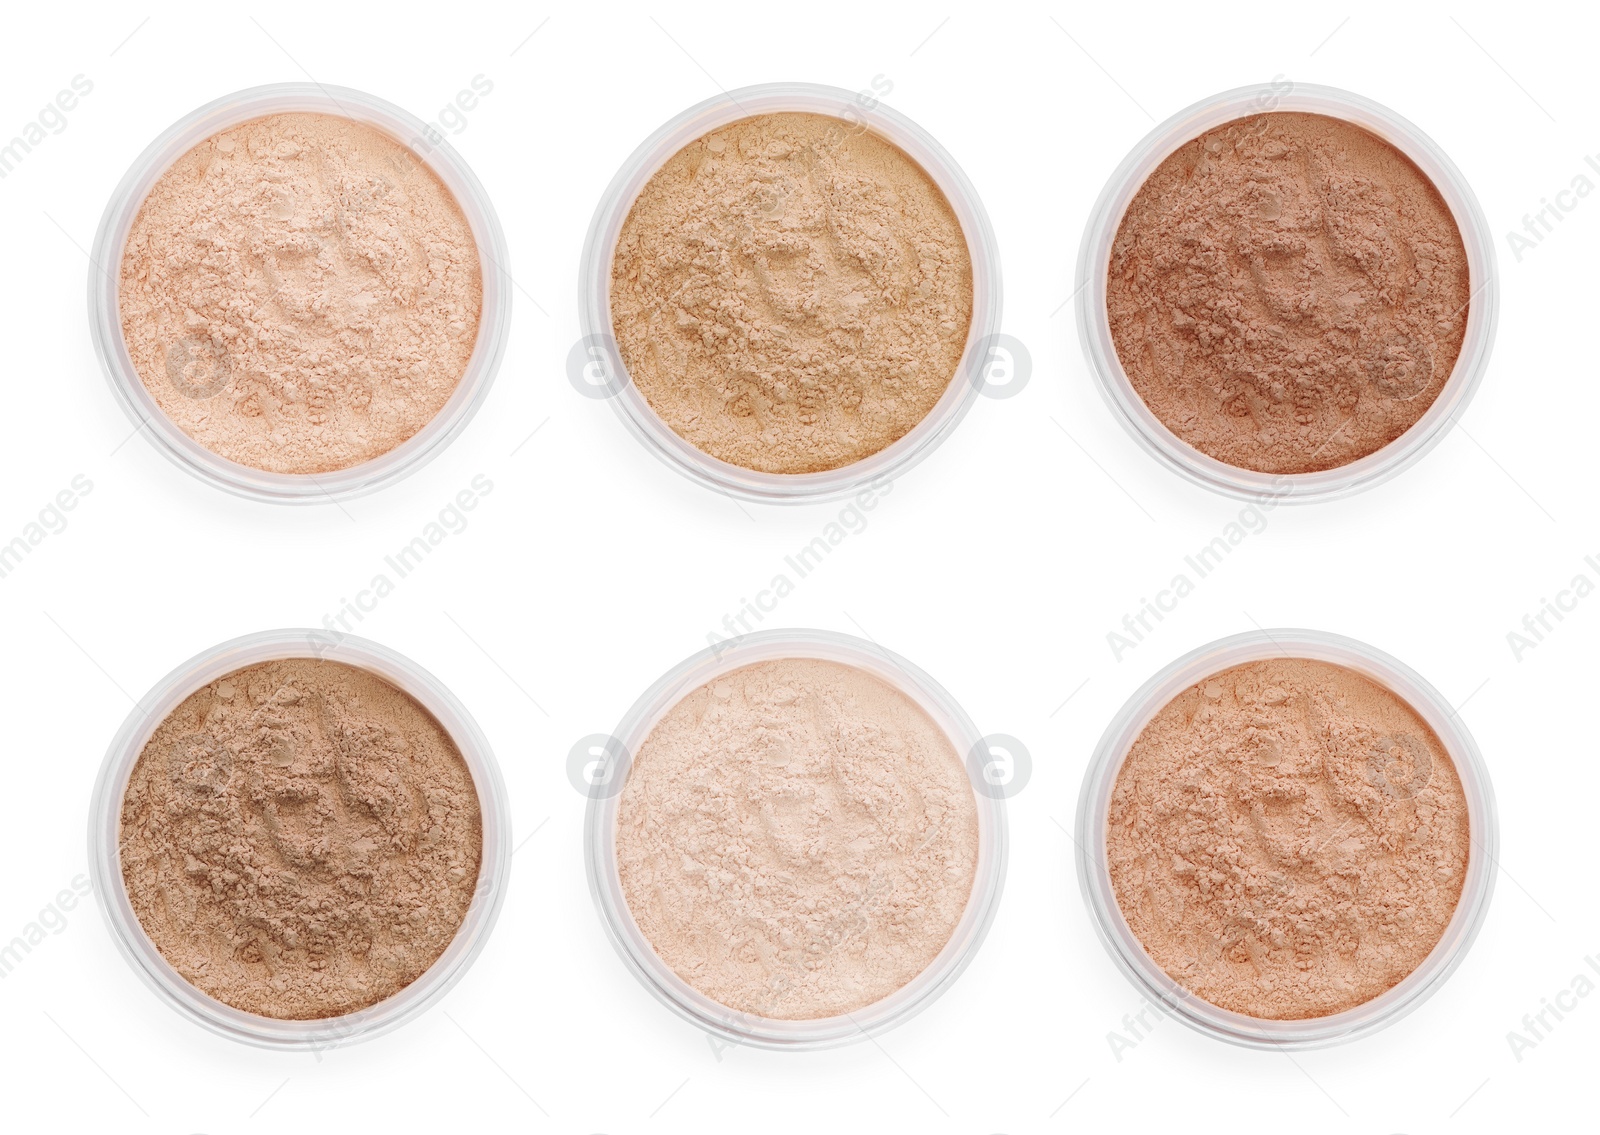 Image of Loose face powders of different shades isolated on white, collection. Top view